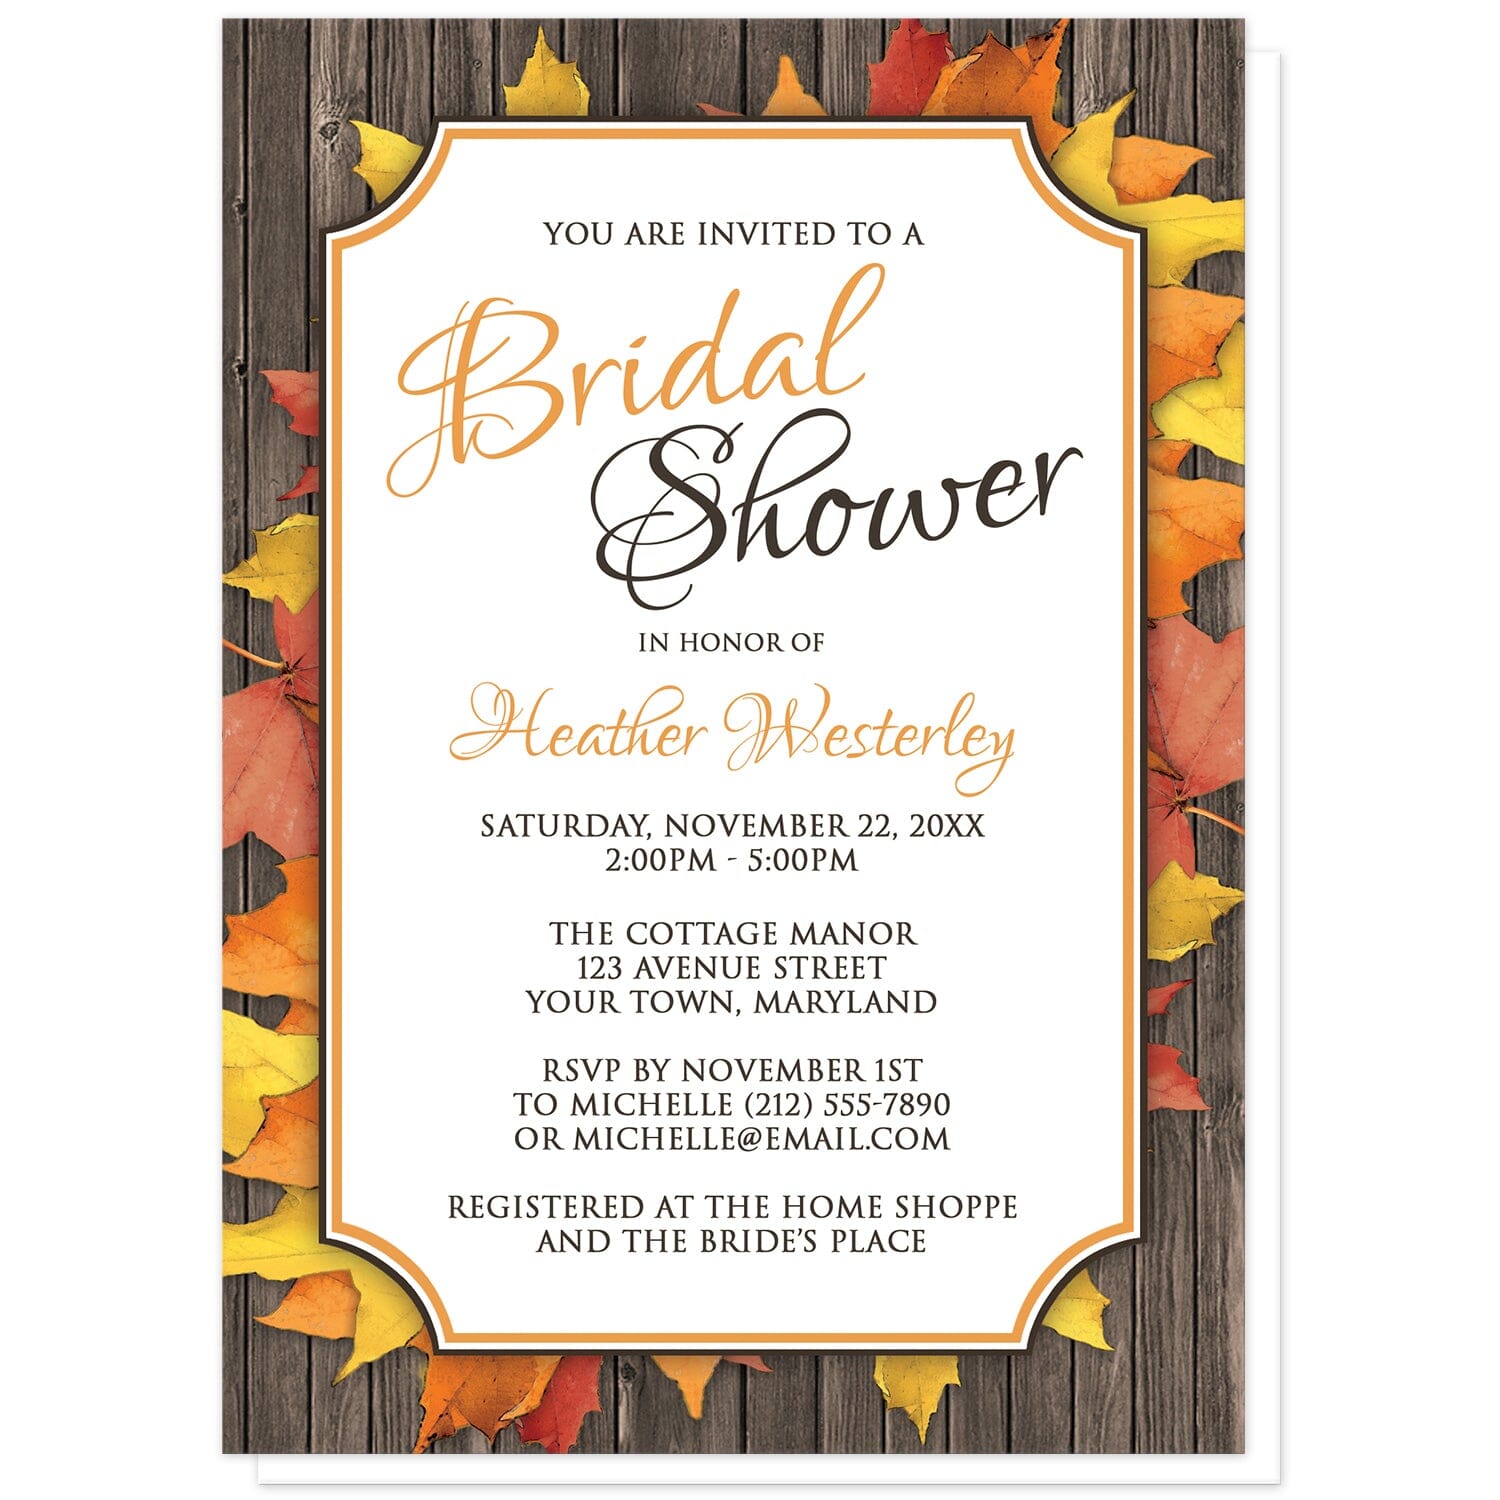 Autumn Orange White Wood Bridal Shower Invitations at Artistically Invited. Autumn orange white wood bridal shower invitations with your celebration details printed in orange and brown in a white frame, over fall leaves spread out over a wood pattern background. This design combines rustic country elements with modern frame lines and fonts.